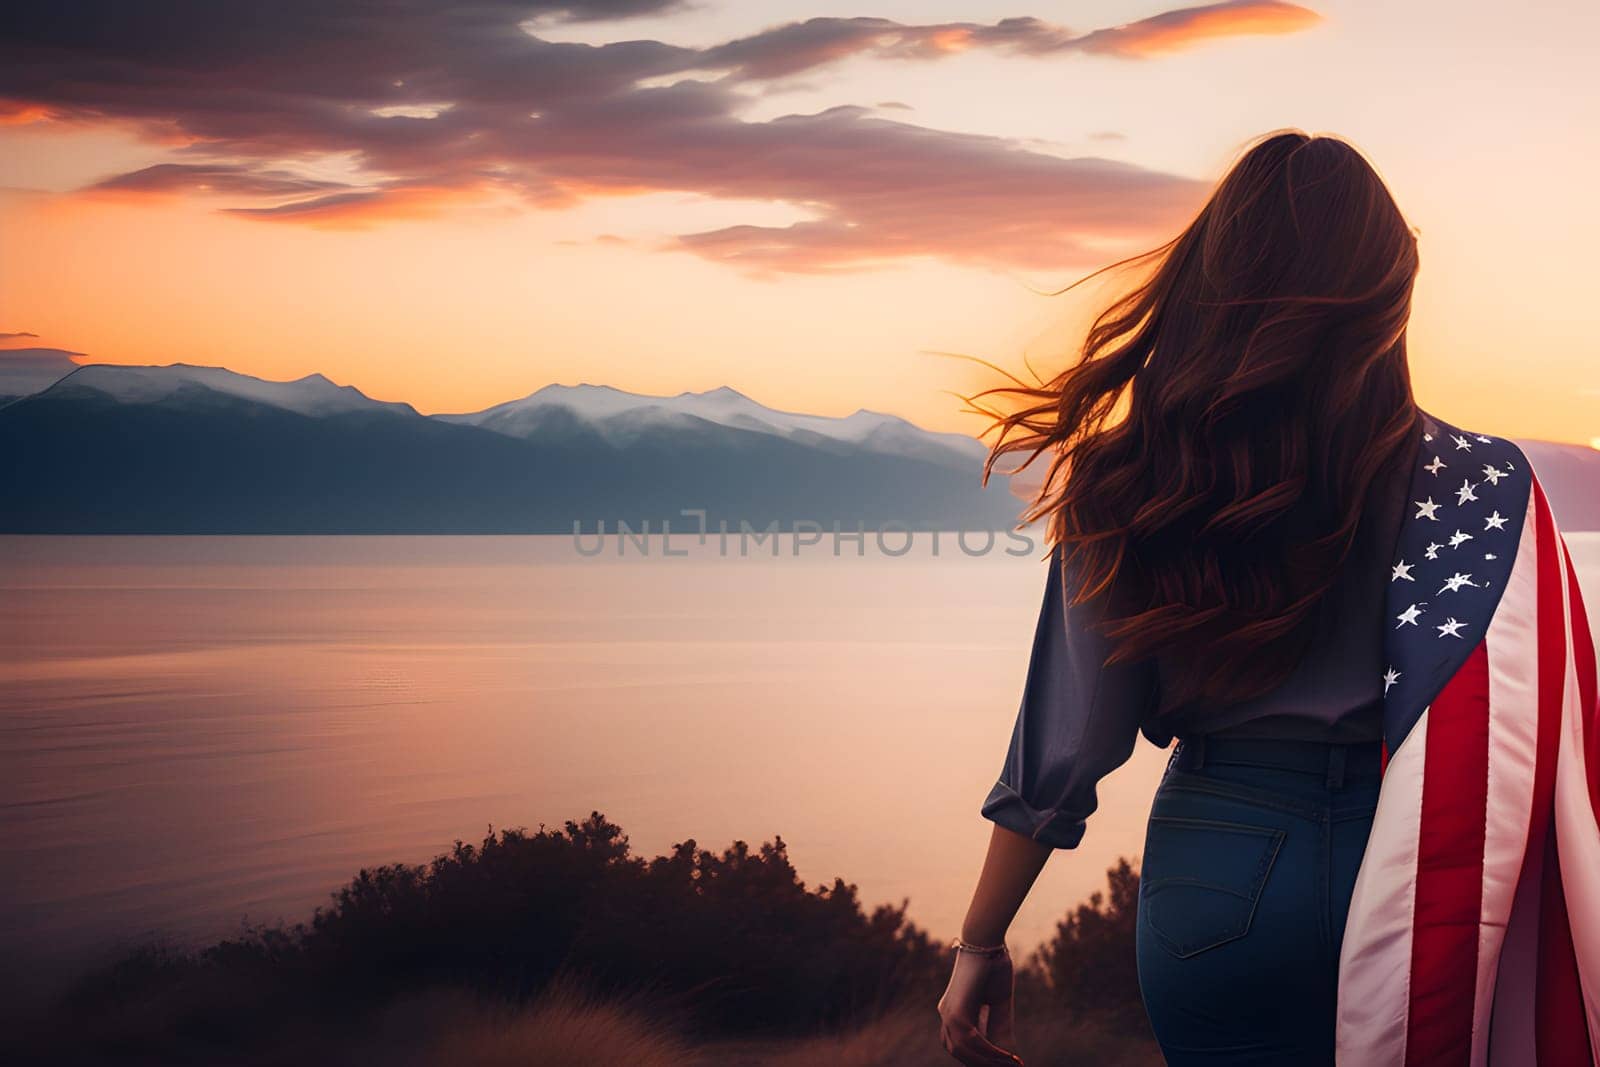 Rear view of a young woman with long hair with a USA flag on her shoulders enjoying the sunset in nature.